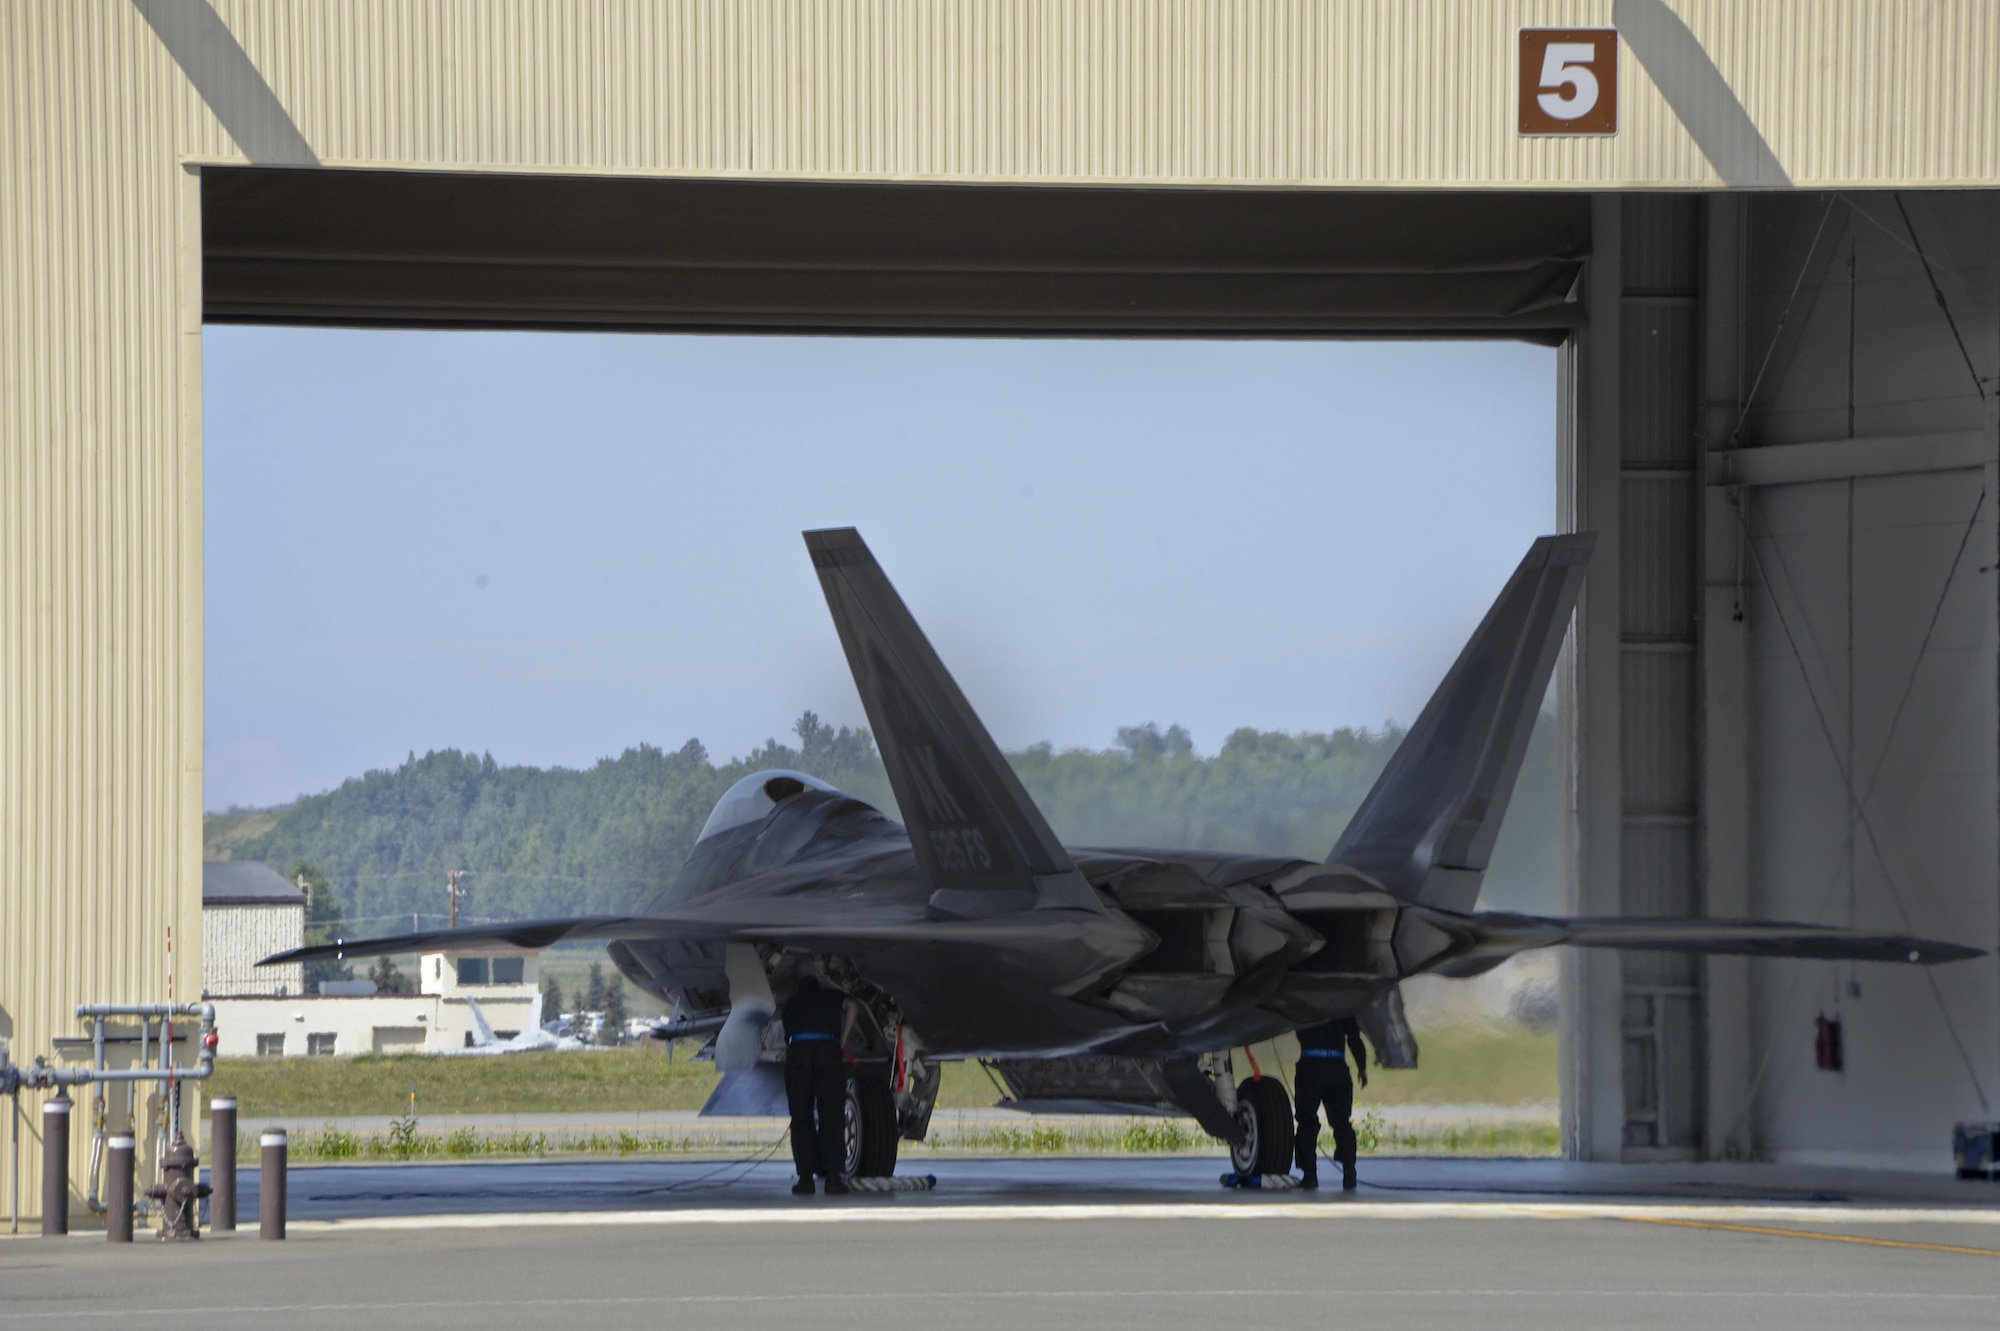 Crewmembers work on an F-22 Raptor from the 525 Fighter Squadron, after it returns from a mission during exercise Northern Edge 2015 at Joint Base Elmendorf-Richardson, Alaska, June 18, 2015. Northern Edge is Alaska’s premier joint training exercise designed to practice operations, techniques and procedures, as well as enhance interoperability among the services. (U.S. Air Force photo/Staff Sgt. William Banton)